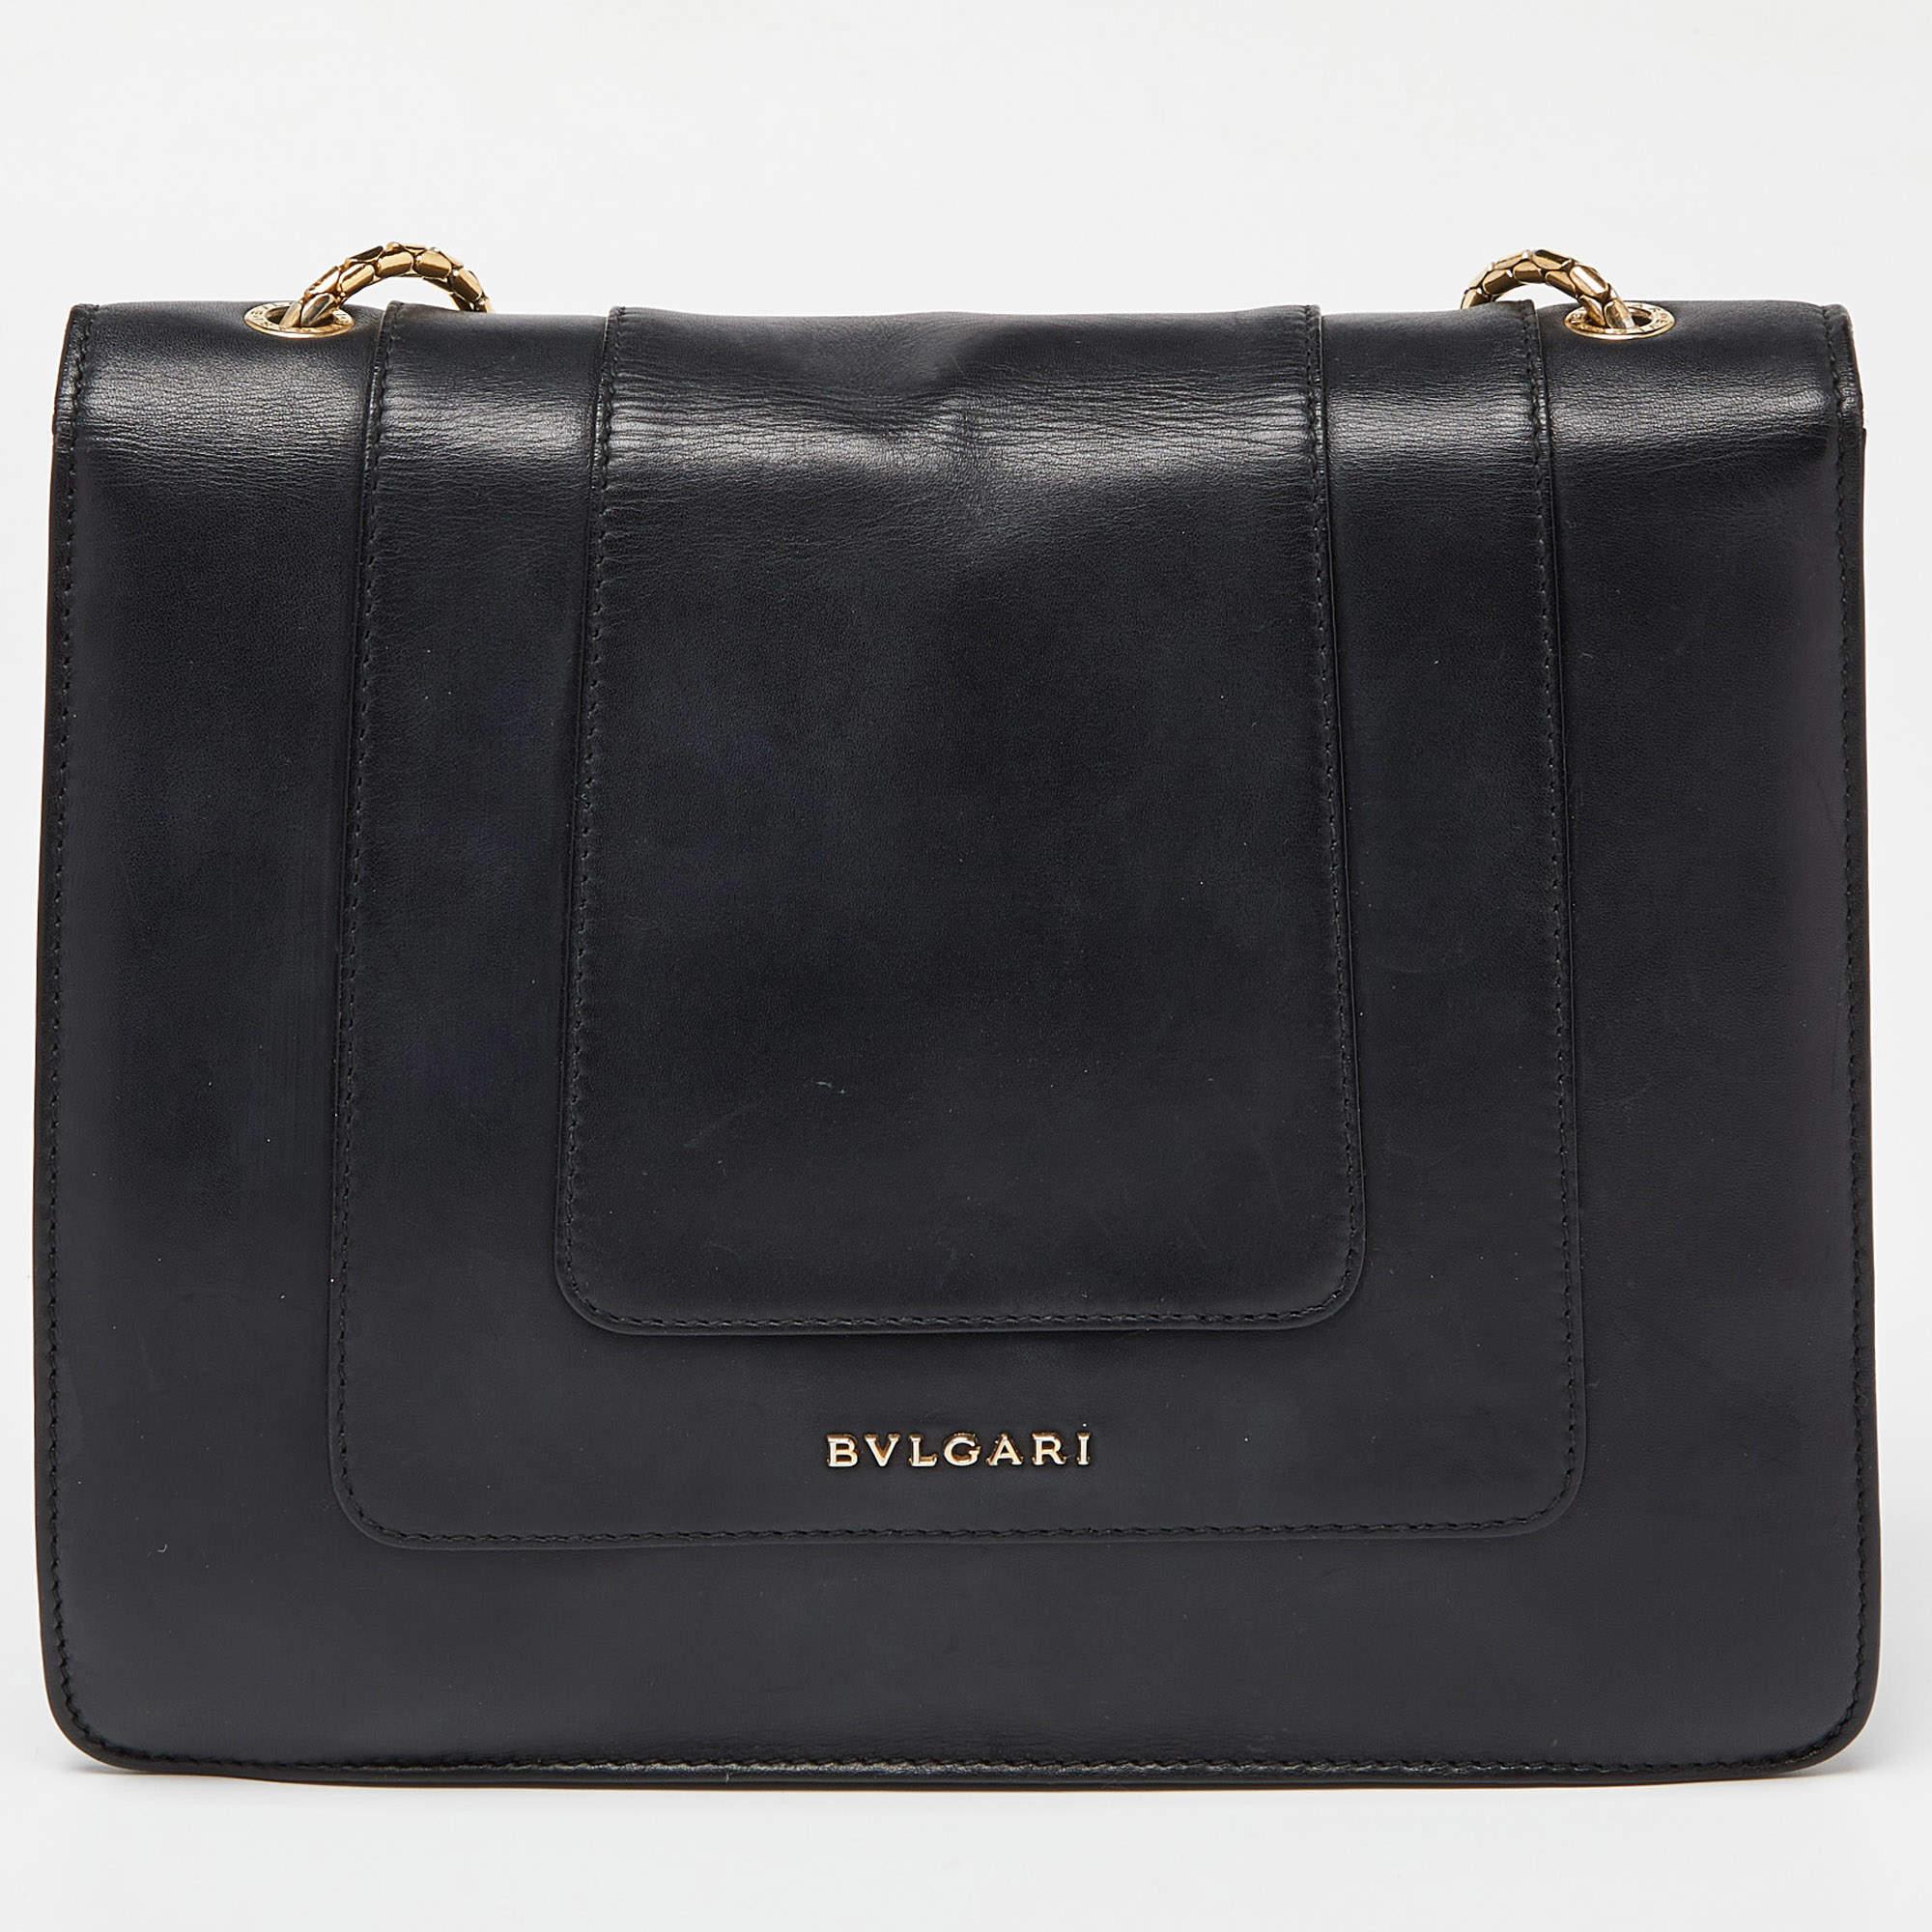 Most designs from Bvlgari, with their striking elements, pay tribute to the Roman roots, and this bag is no different. Made from black leather, it is an accessory of utility and luxury. Perfectly sized, the interior has enough room to store your